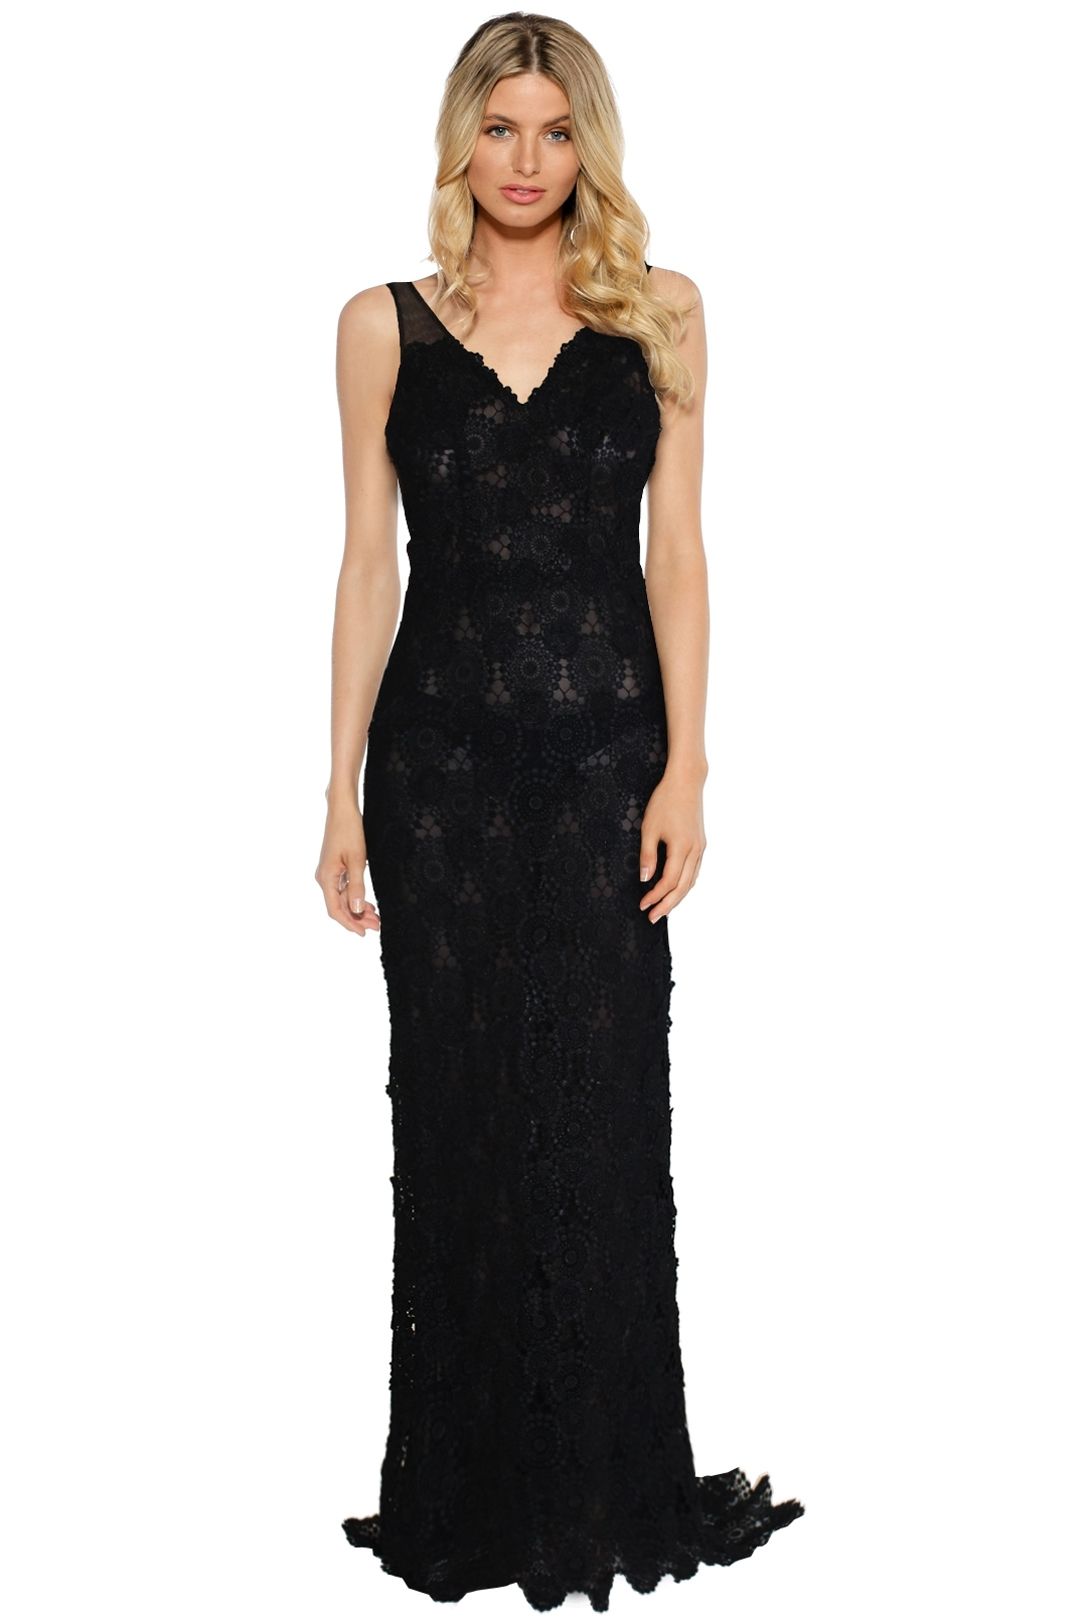 LUOM.O - Onyx Dress - Black Lace - Front